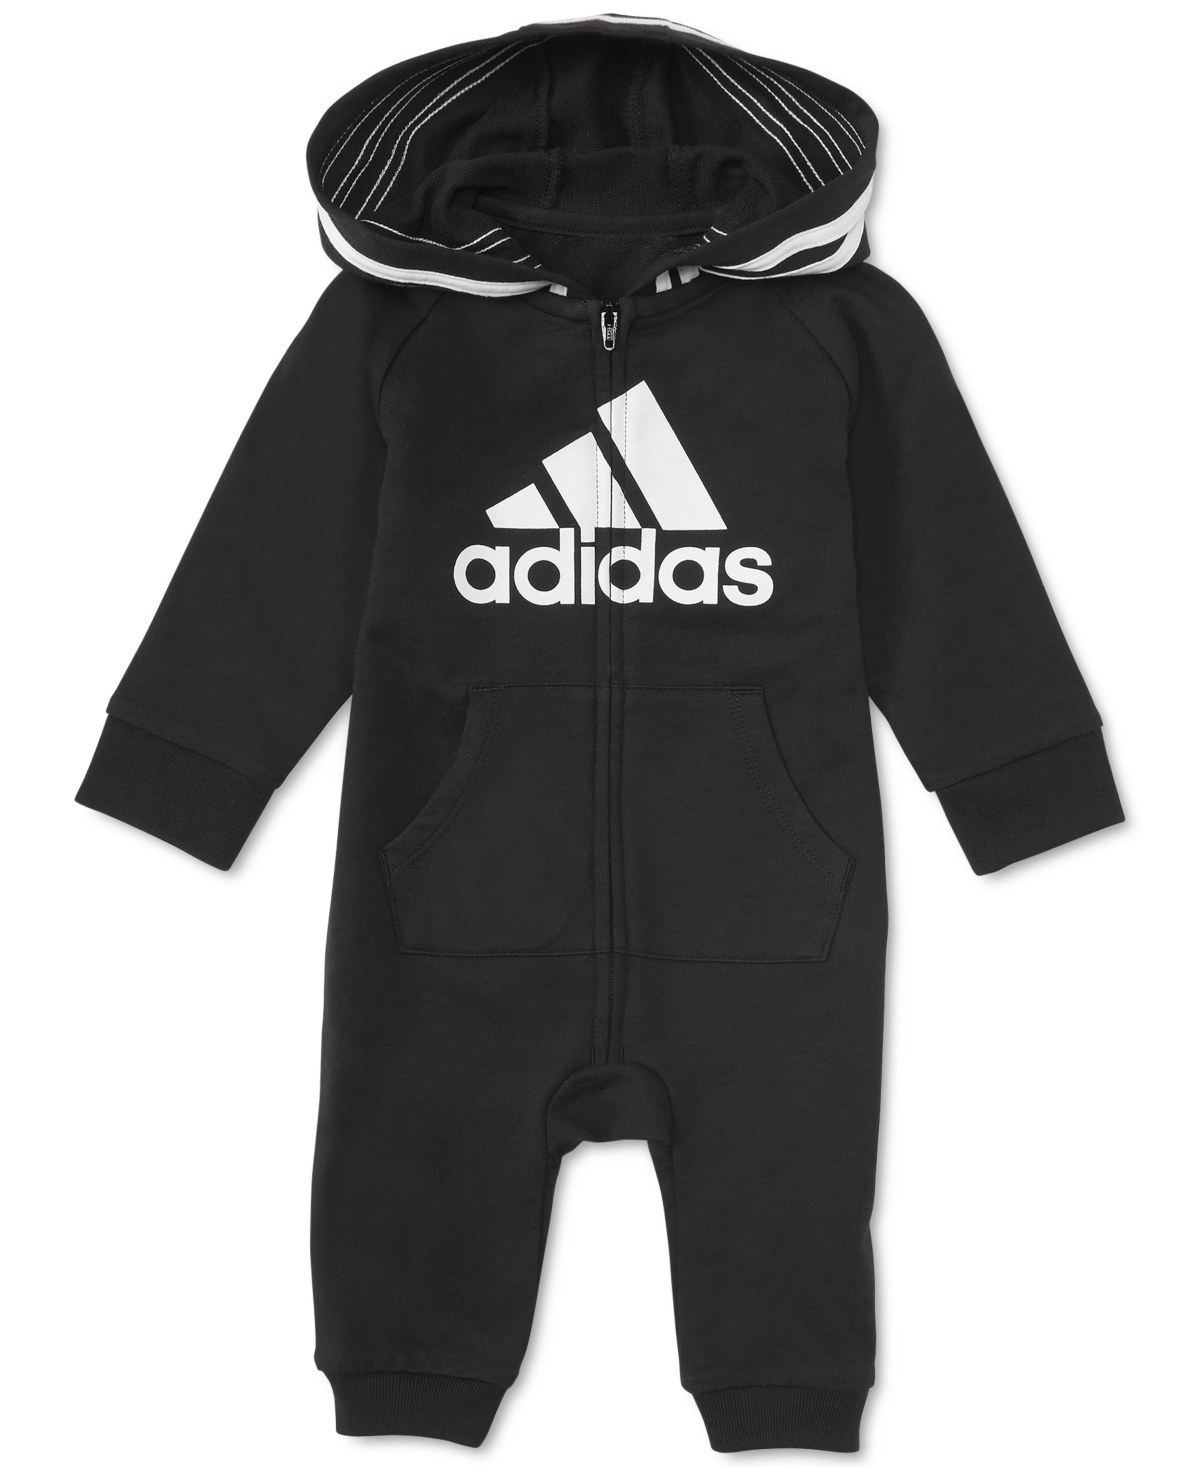 adidas Baby Neutral Logo Coverall